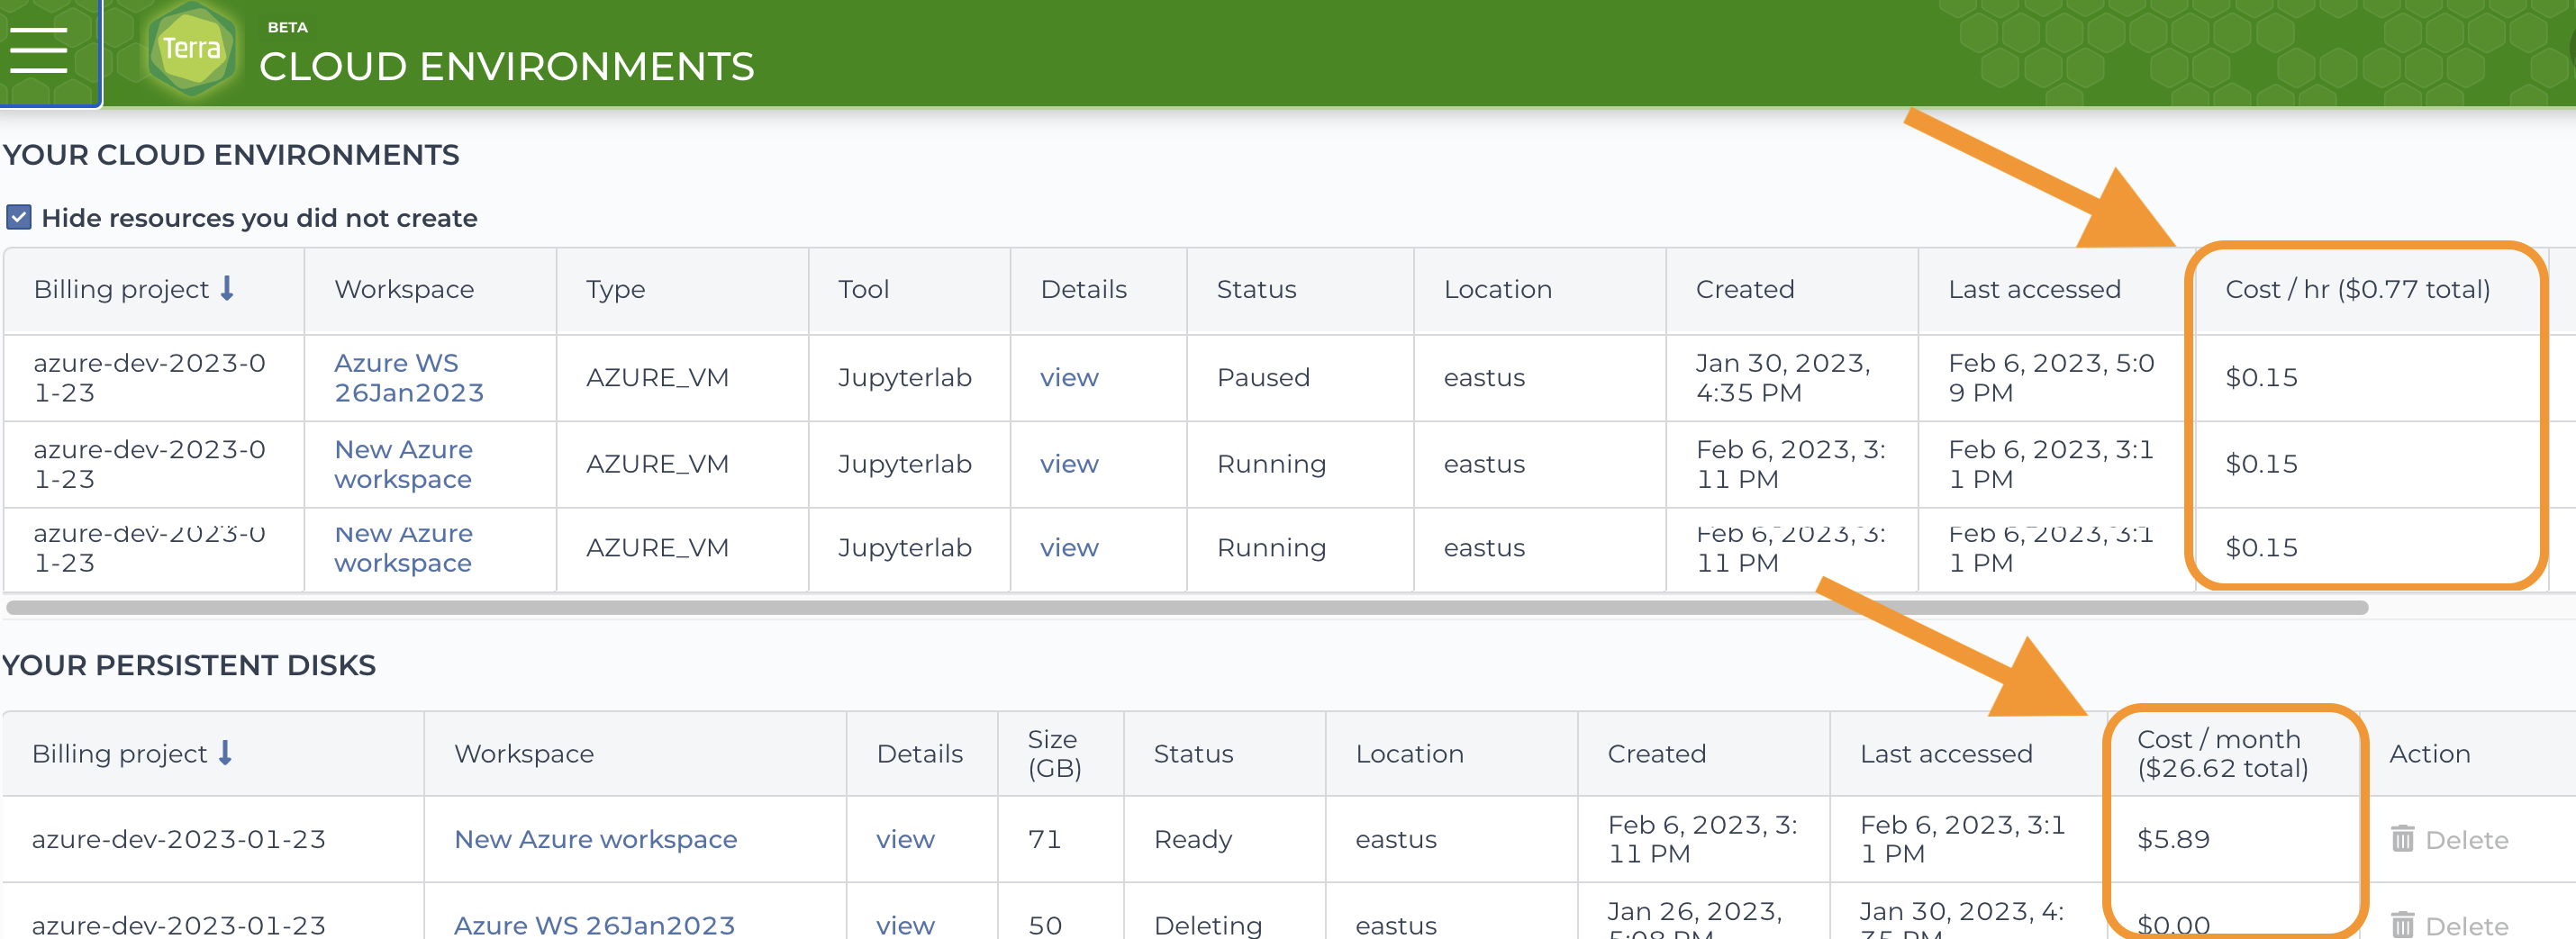 Terra-on-Azure_Cloud-Environments-page-with-resource-costs_Screenshot.png